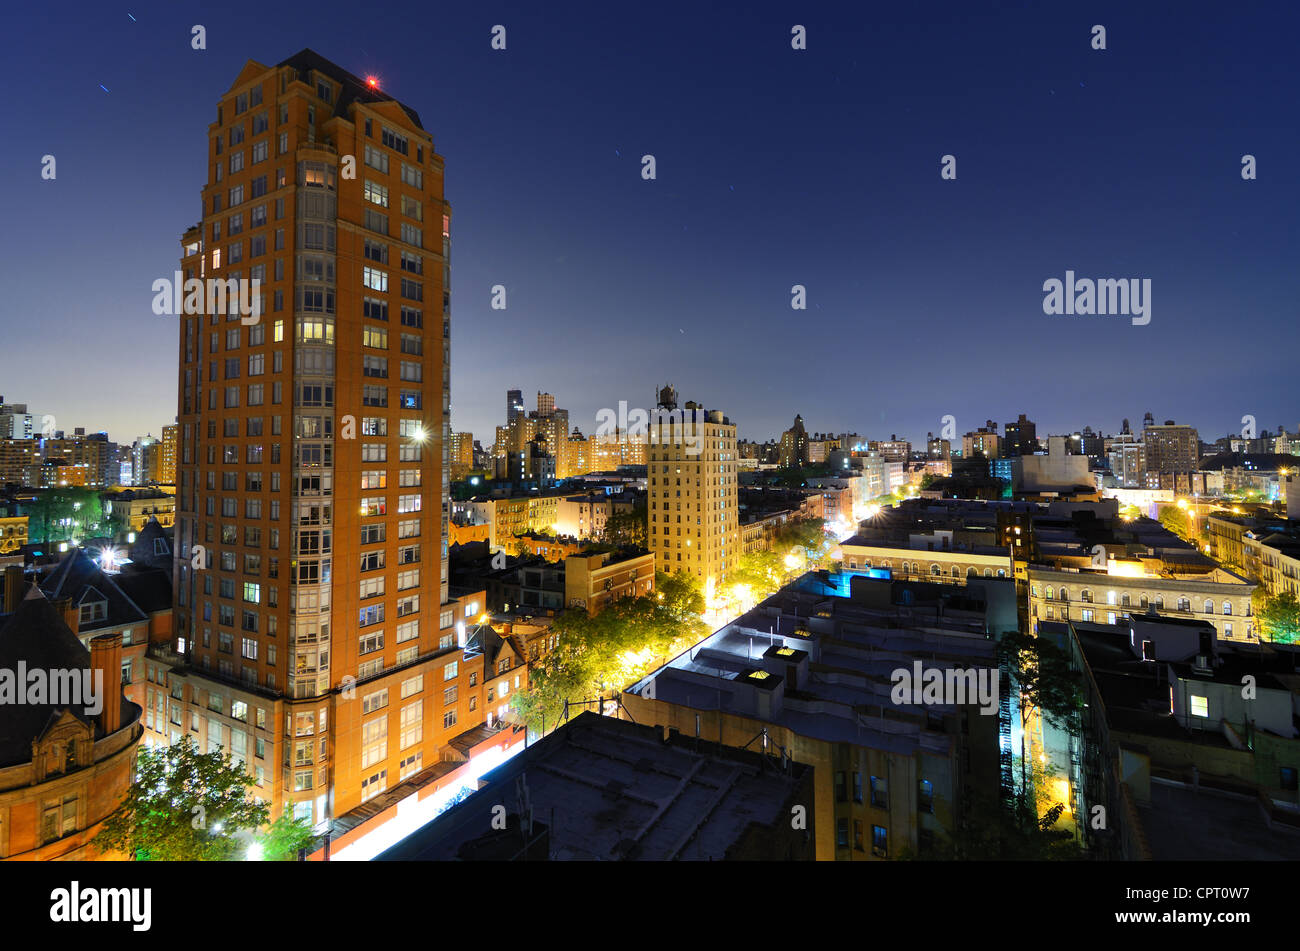 skyline of residential buildings in the Upper West Side of Manhattan at night Stock Photo